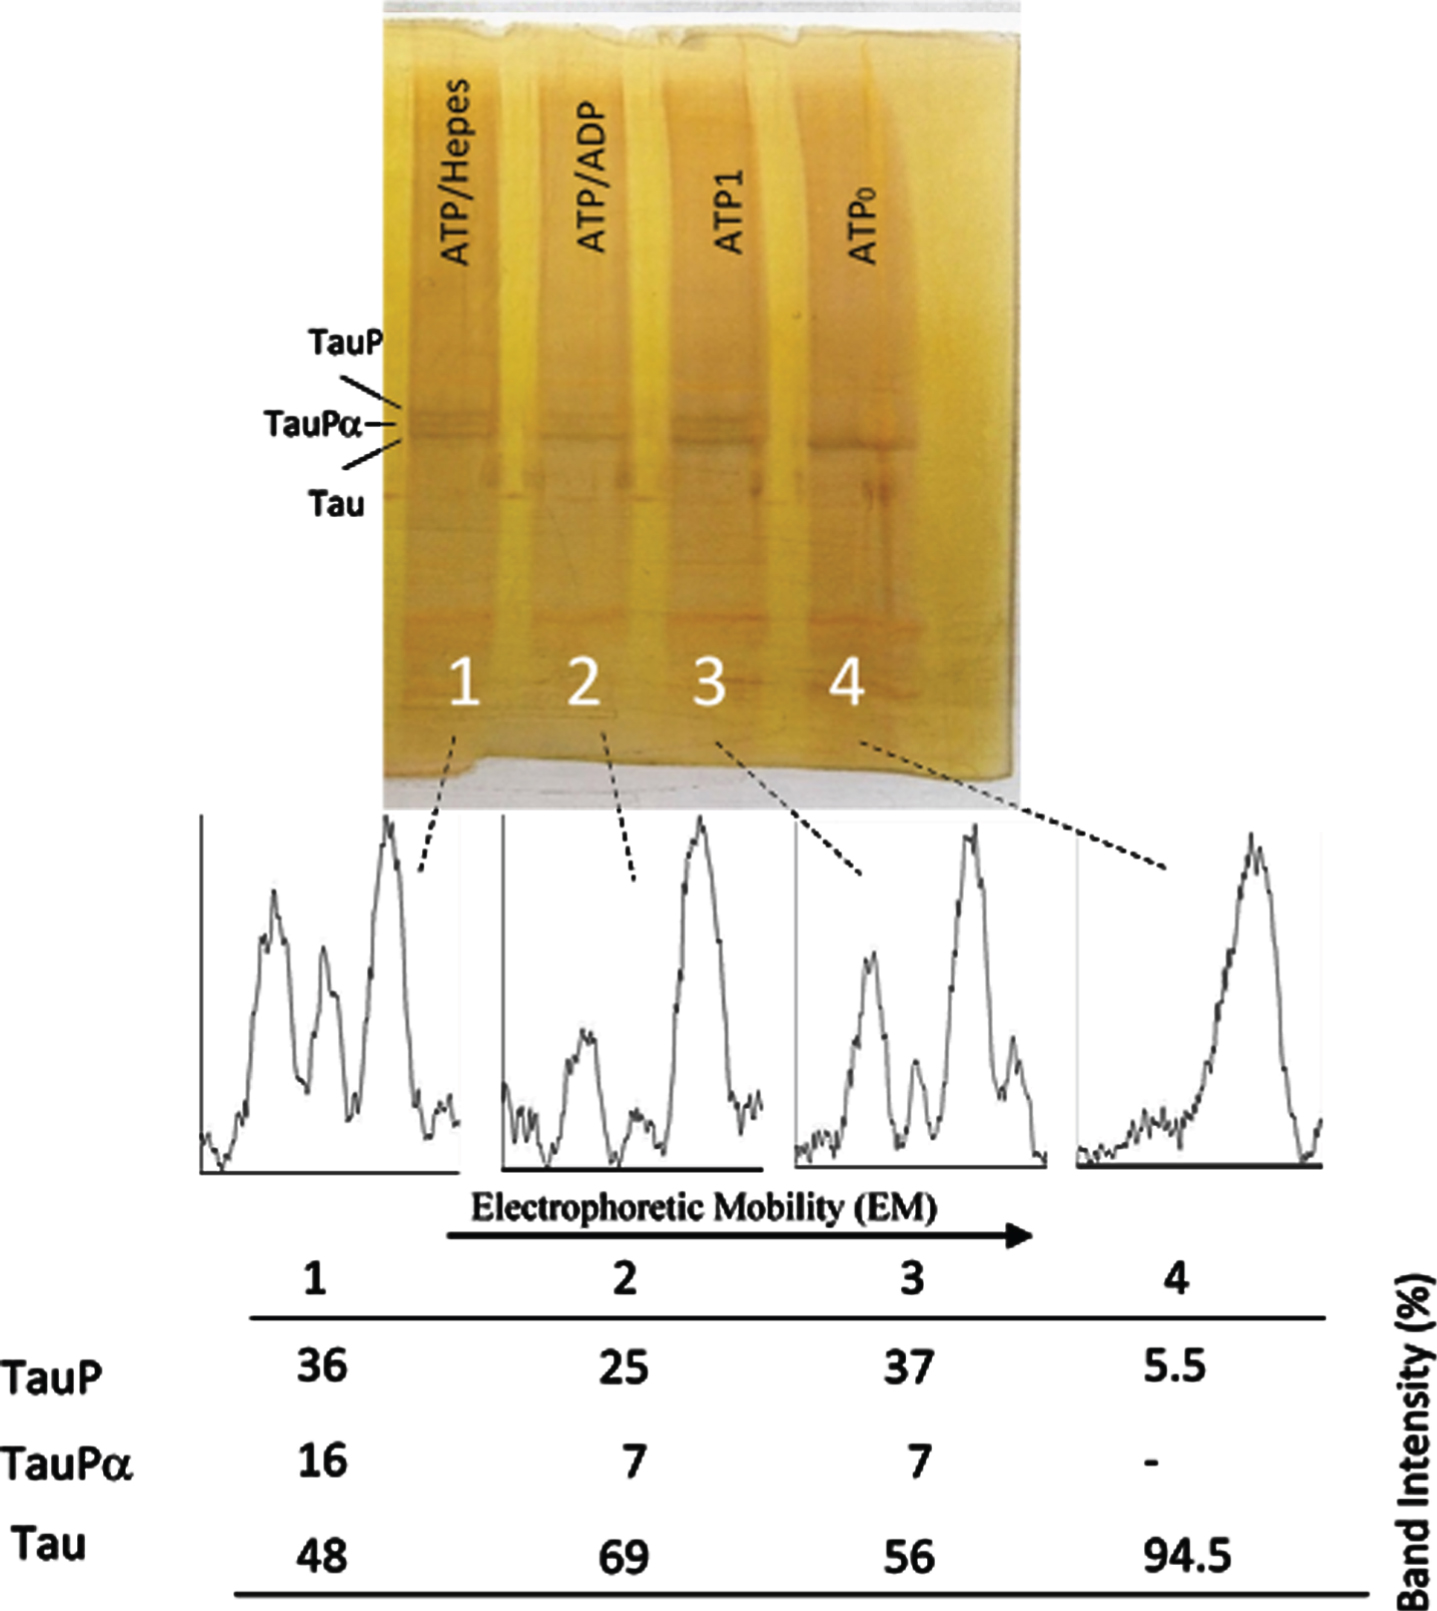 Successive incubation of tau protein with ATP and ADP. The mixture of tau protein and C-PKA prepared as described in Materials and Method (Tau-C-PKA) was diluted 1/10 in a buffer composed of 75 μl of buffer Hepes containing 10 mM Hepes and 0.1 M NaCl, at pH 7 and 50 μl of phosphate buffer containing 250 mM phosphate and 0.1 mg/ml Ampicillin at pH 7. This reaction mixture contained 15 mM MgCl2, 0.25 mM EGTA, 50 mM P1, P5-Di(adenosine-5’)pentaphosphate, 0.25 mM 2-mercaptoethanol and ATP 0.1 mM. Lane 4 corresponds to tau protein in this reaction mixture at time 0 of incubation (ATP0). After 2 h of incubation at 30°C, in the presence of ATPMg2+, the reaction mixture was divided in three parts: the first one (ATP1) was loaded in the gel (lane 3); the second one was incubated at 30°C for two additional hours in the presence of 1.1 mM ADP(ATP/ADP) (lane 2); the third one was incubated for the same time, at 30°C, in the presence of Hepes buffer, (ATP/Hepes) (lane 1). Scanning of the electrophoresis bands was carried out after applying a filter to improve the photo quality. The table at the bottom of the figure shows the results of peak percentages resulting from the scanning. TauP represent the band displaying the lowest mobility, and TauPα represents the intermediate band usually observed at short times of incubation. Scanning was done after applying a filter to improve the photo quality.